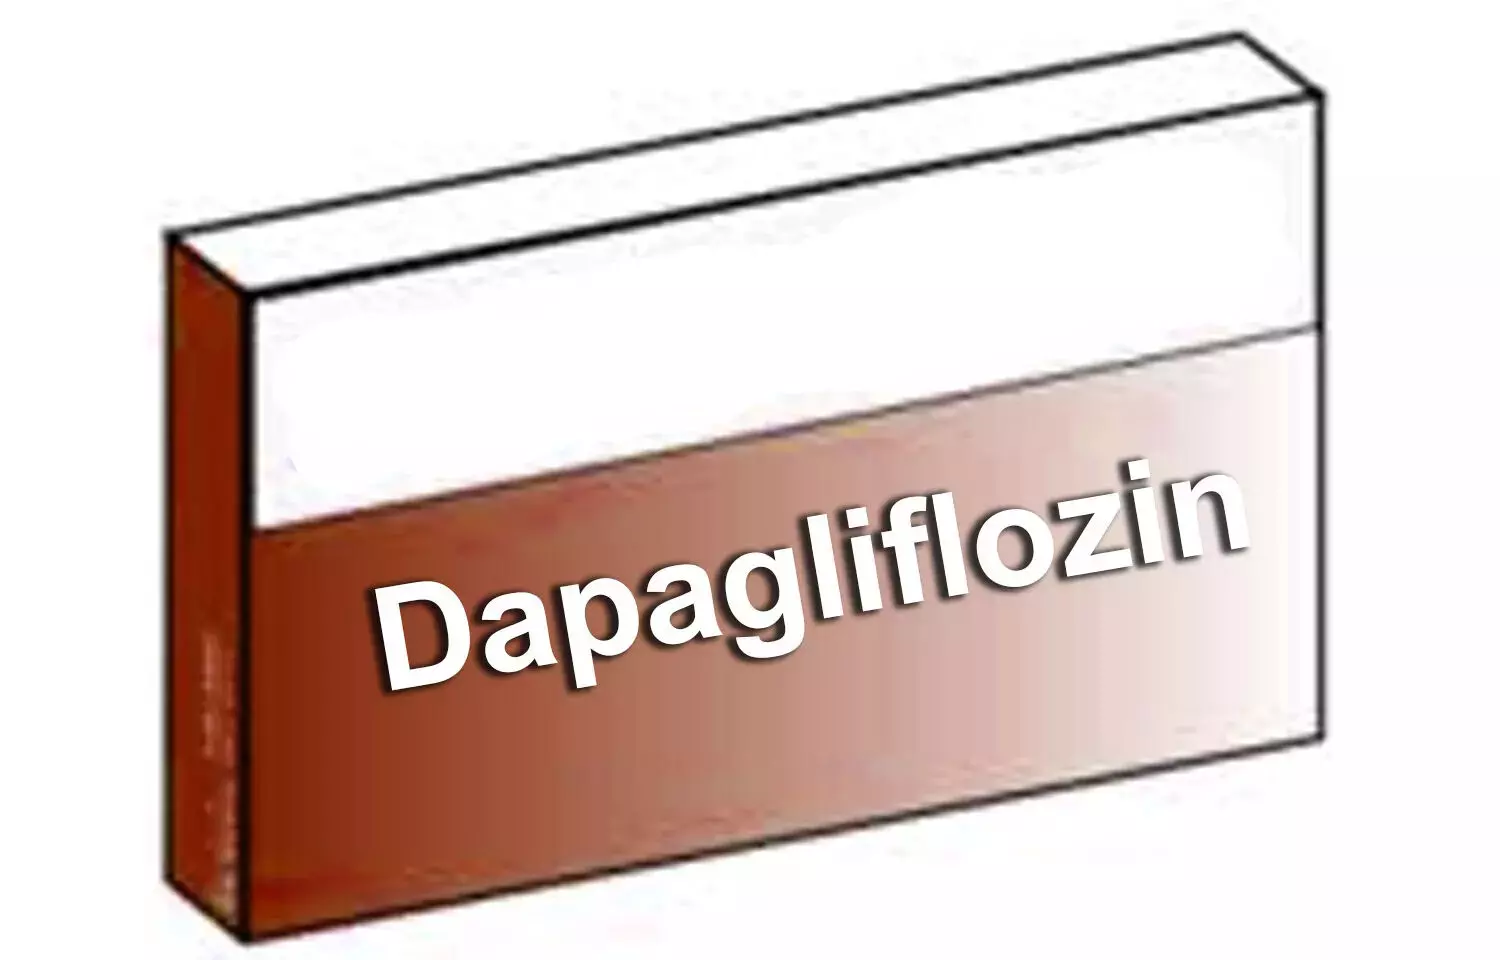 Dapagliflozin associated with improved outcomes in heart failure patients regardless of frailty